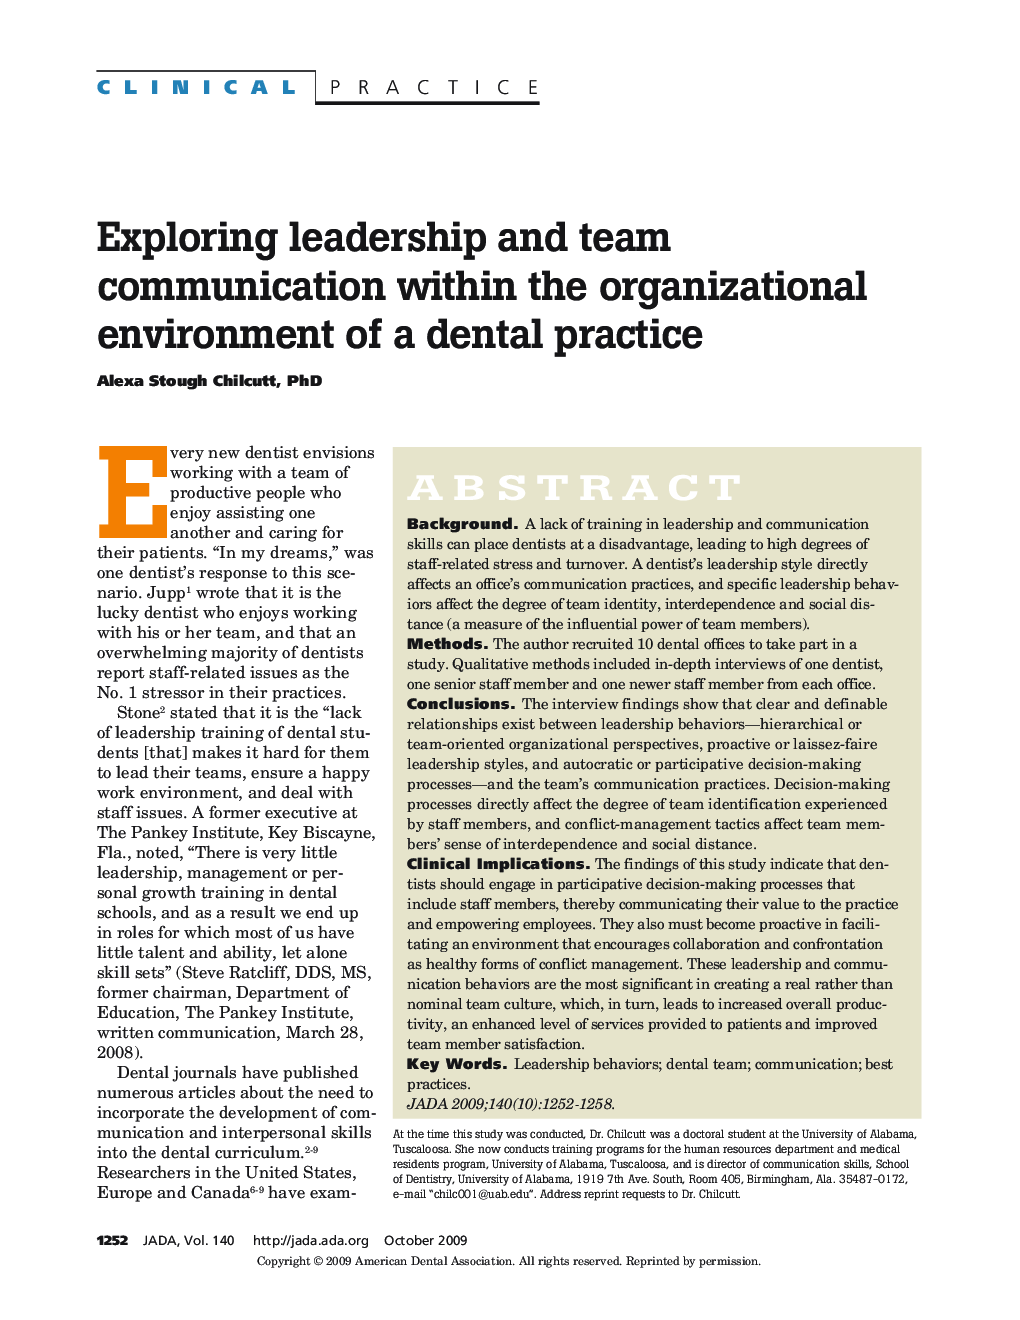 Exploring Leadership and Team Communication Within the Organizational Environment of a Dental Practice 